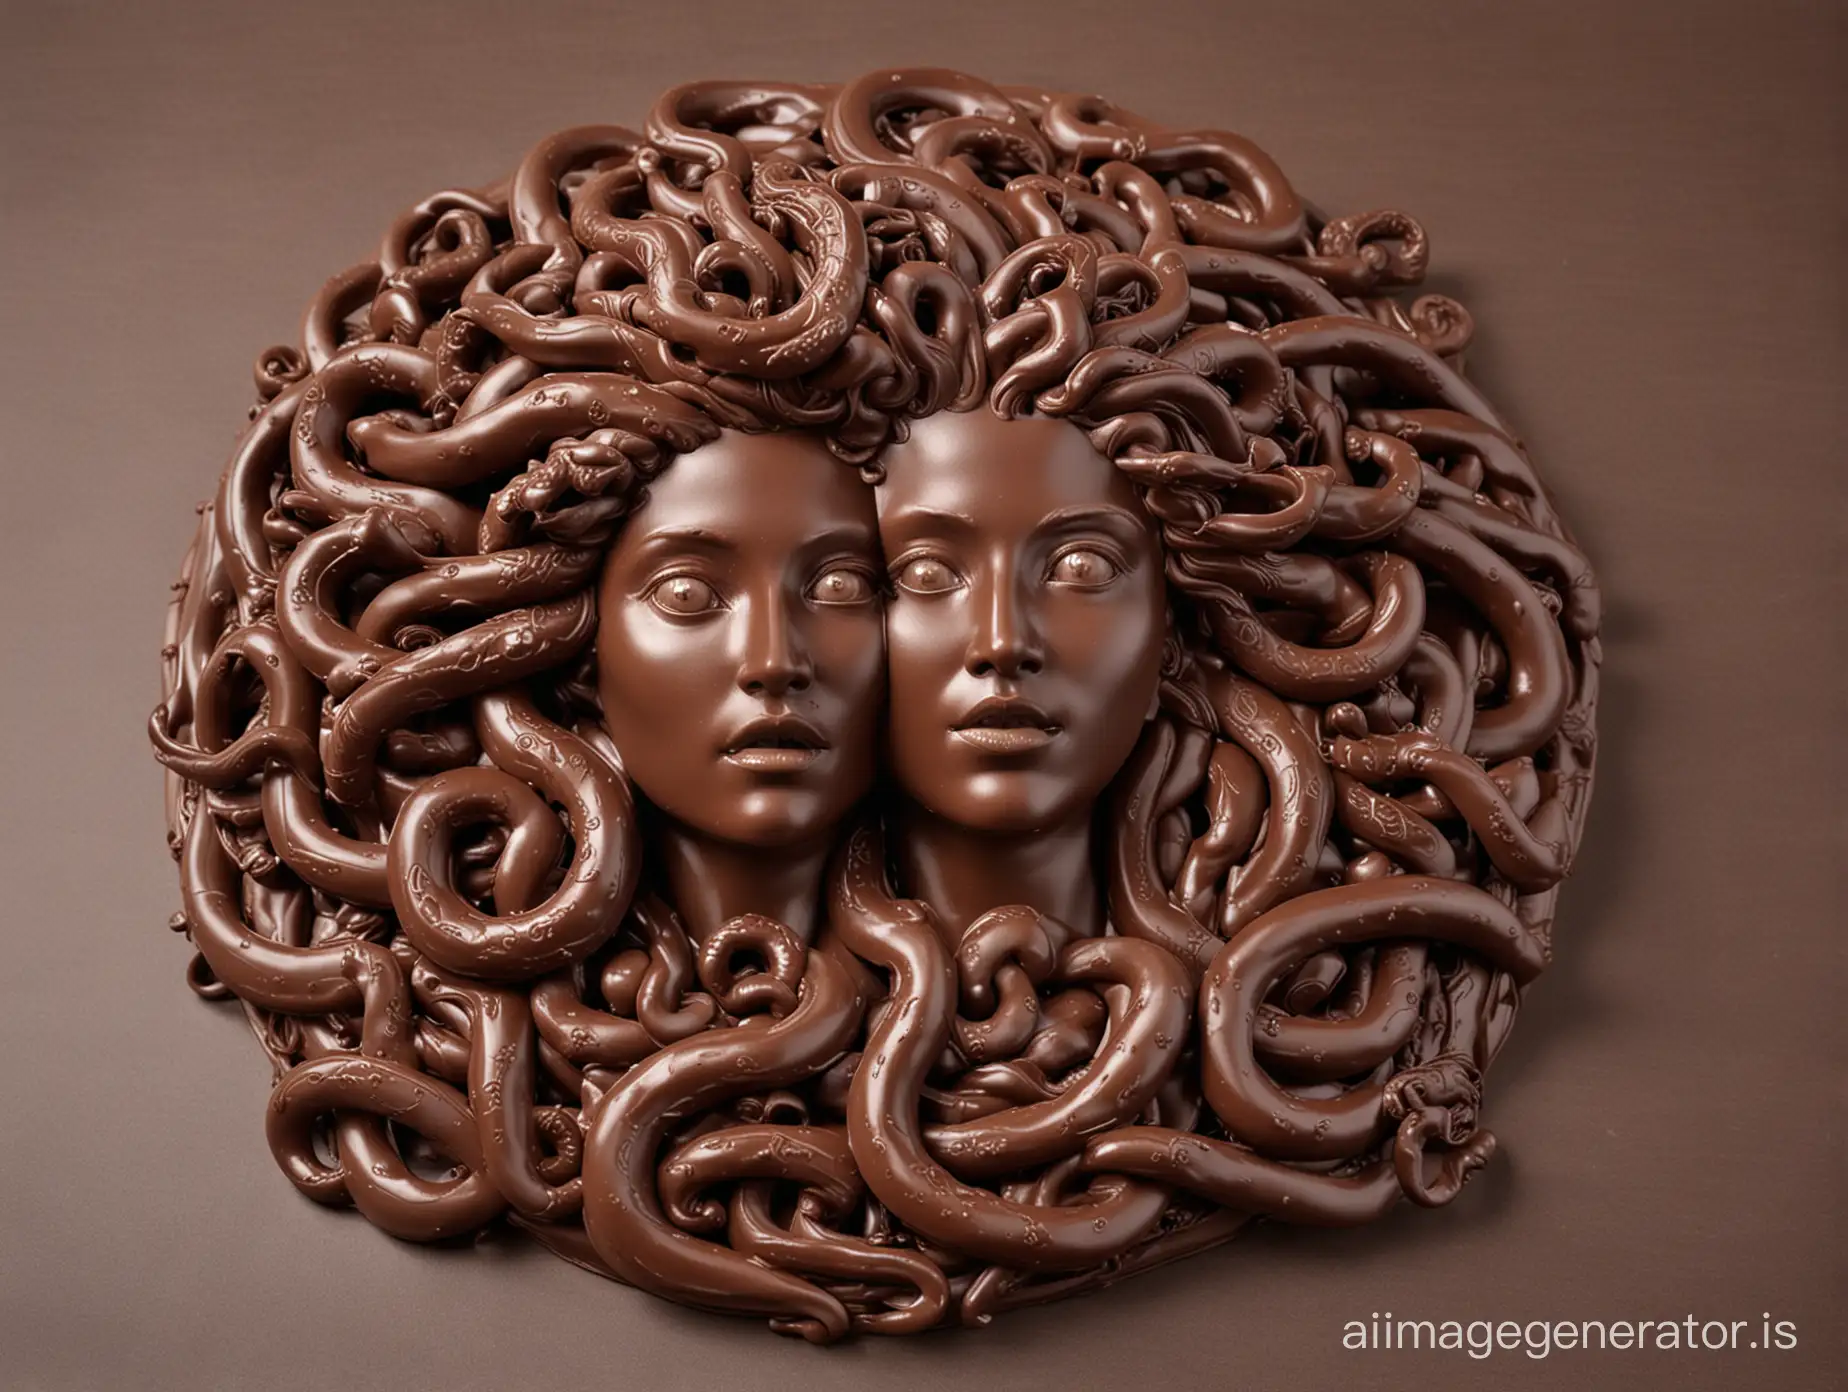 Chocolate-Medusa-Head-Sculpture-Intricately-Crafted-Confectionary-Art